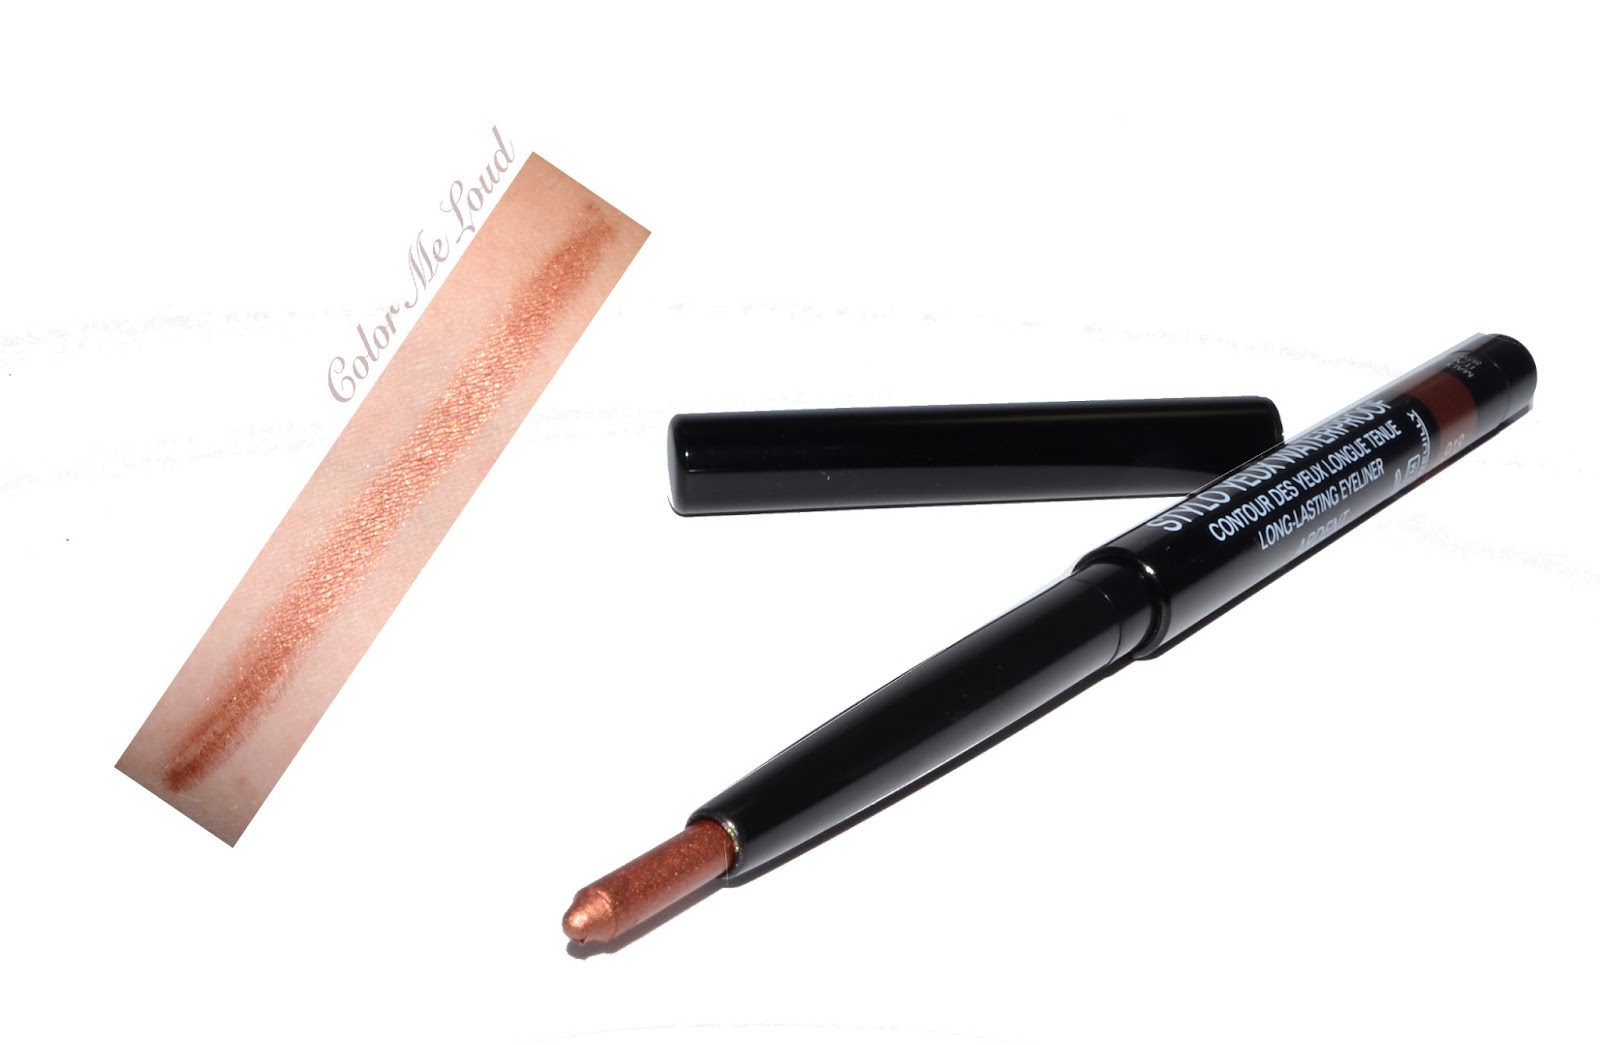 Chanel Les 4 Ombres #254 Tissé D'Automne, Stylo Yeux Waterproof #918 Ardent  for Les Automnales Collection Fall 2015, Review, Swatch & FOTD